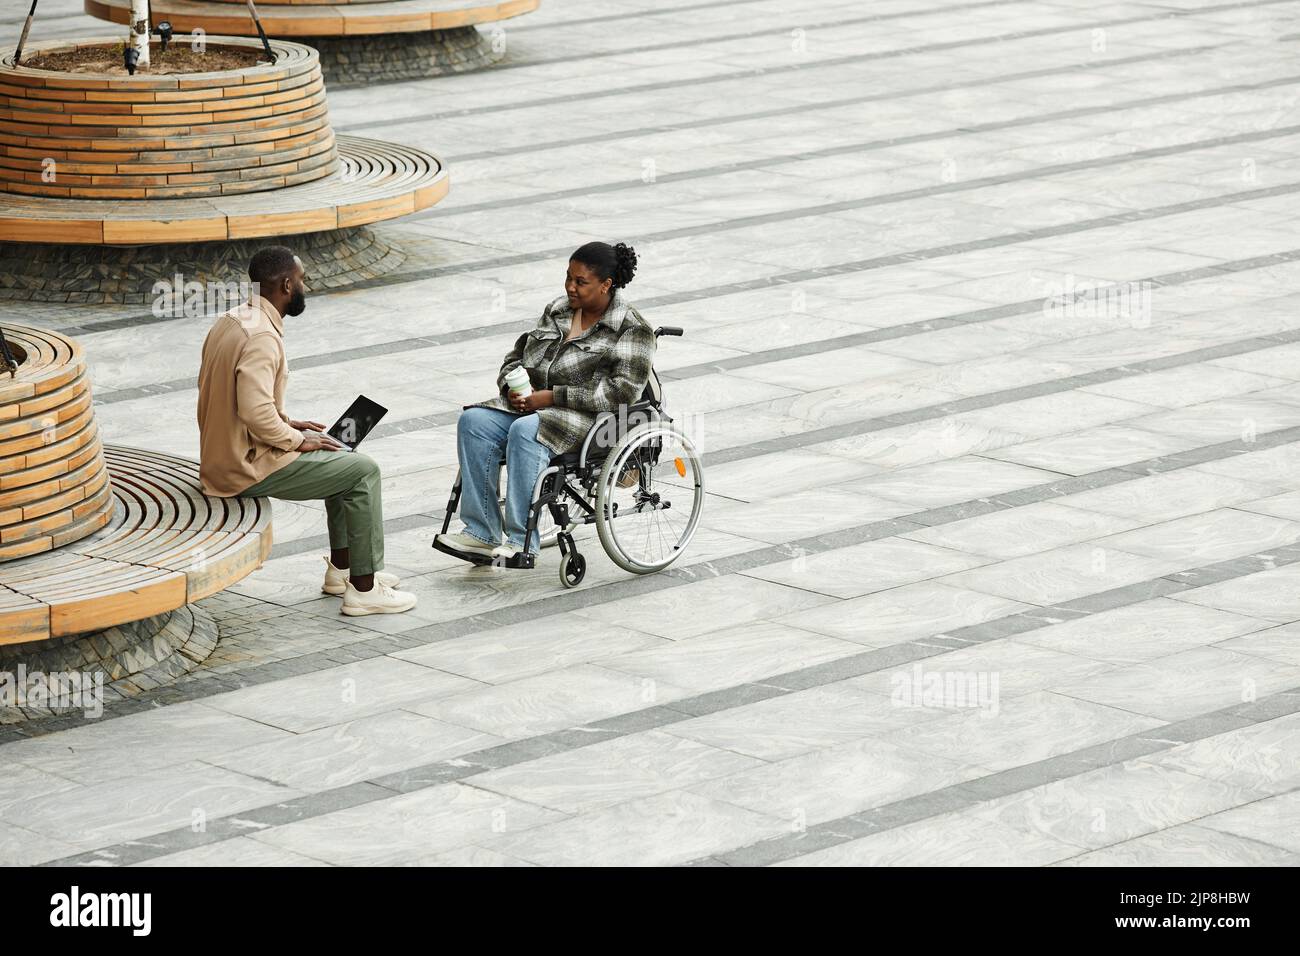 Graphic wide angle view of adult couple with black woman in wheelchair chatting outdoors in city setting against tiled floor, copy space Stock Photo